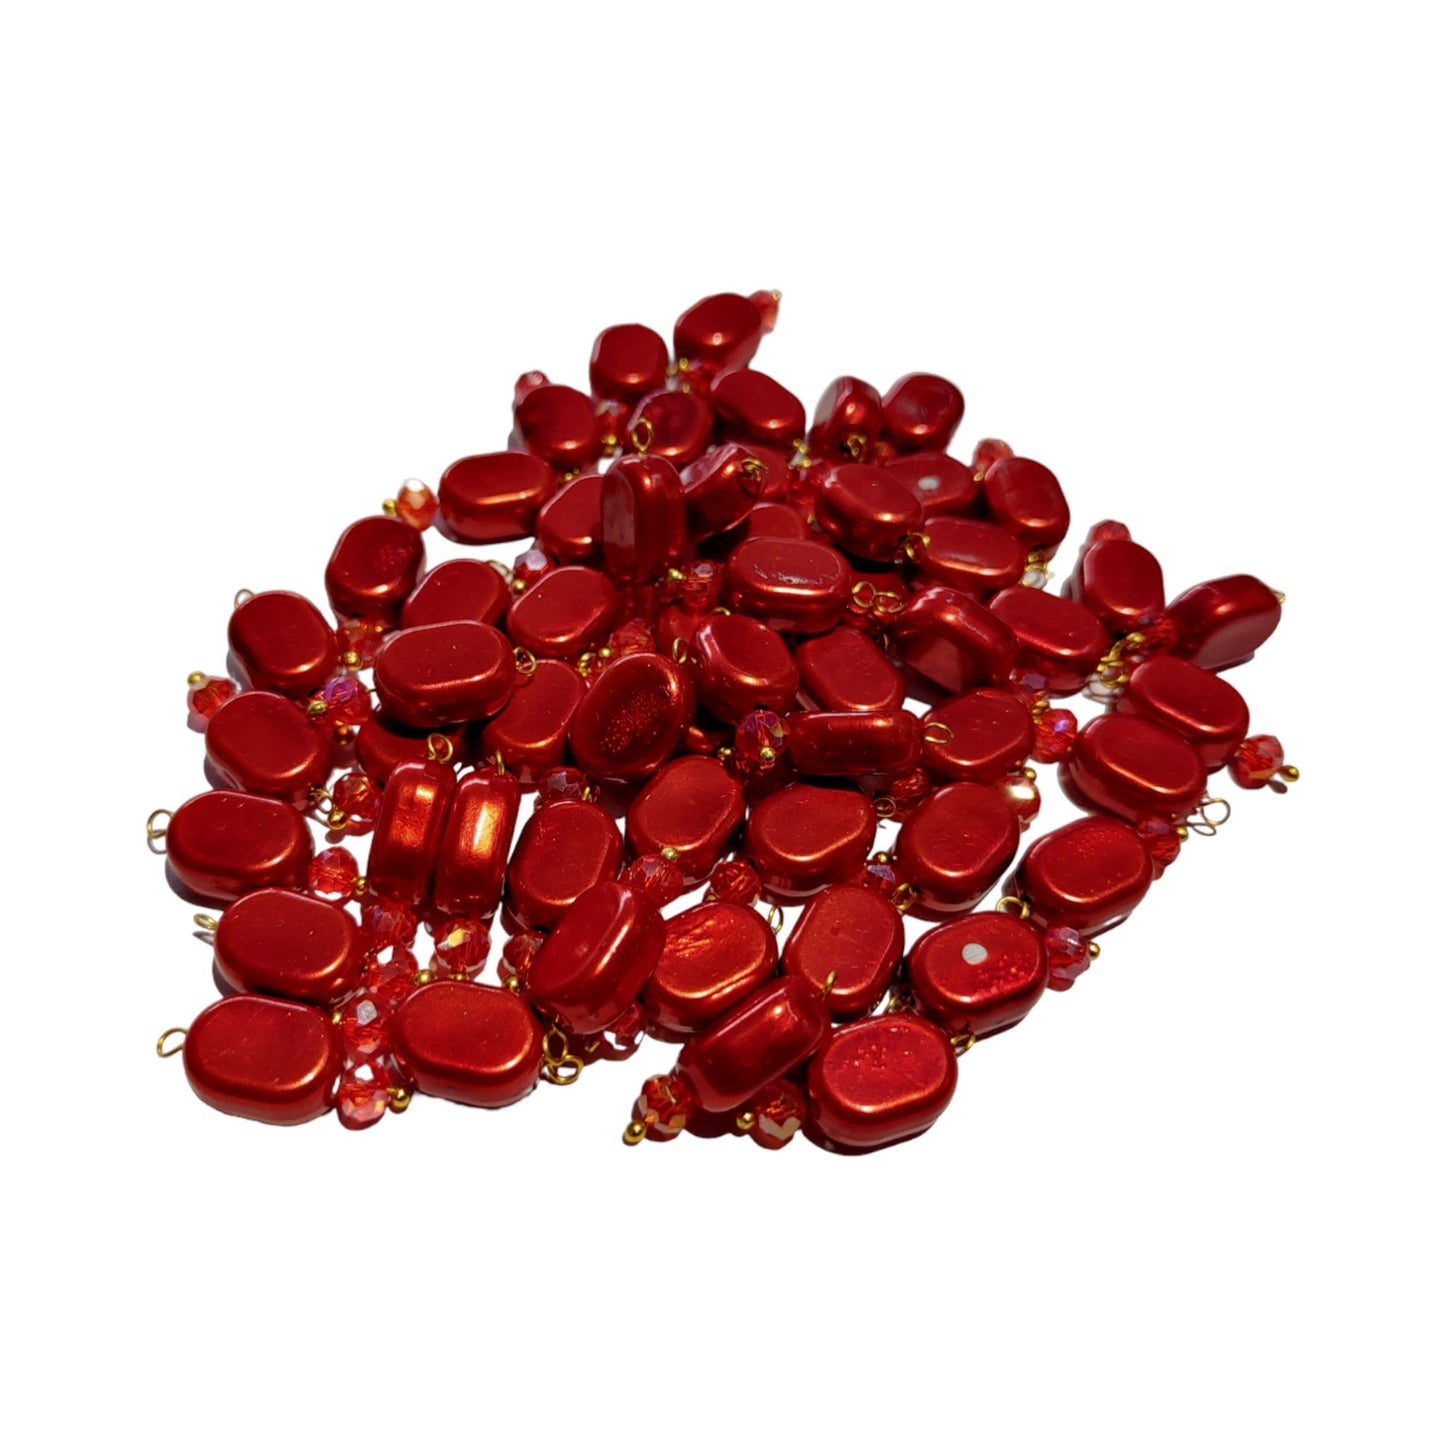 Indian Petals 100Pcs Colored Plastic Bead with Crystal Ball Drop for Craft Décor or Jewelry Making, 8x12mm, Dark Red